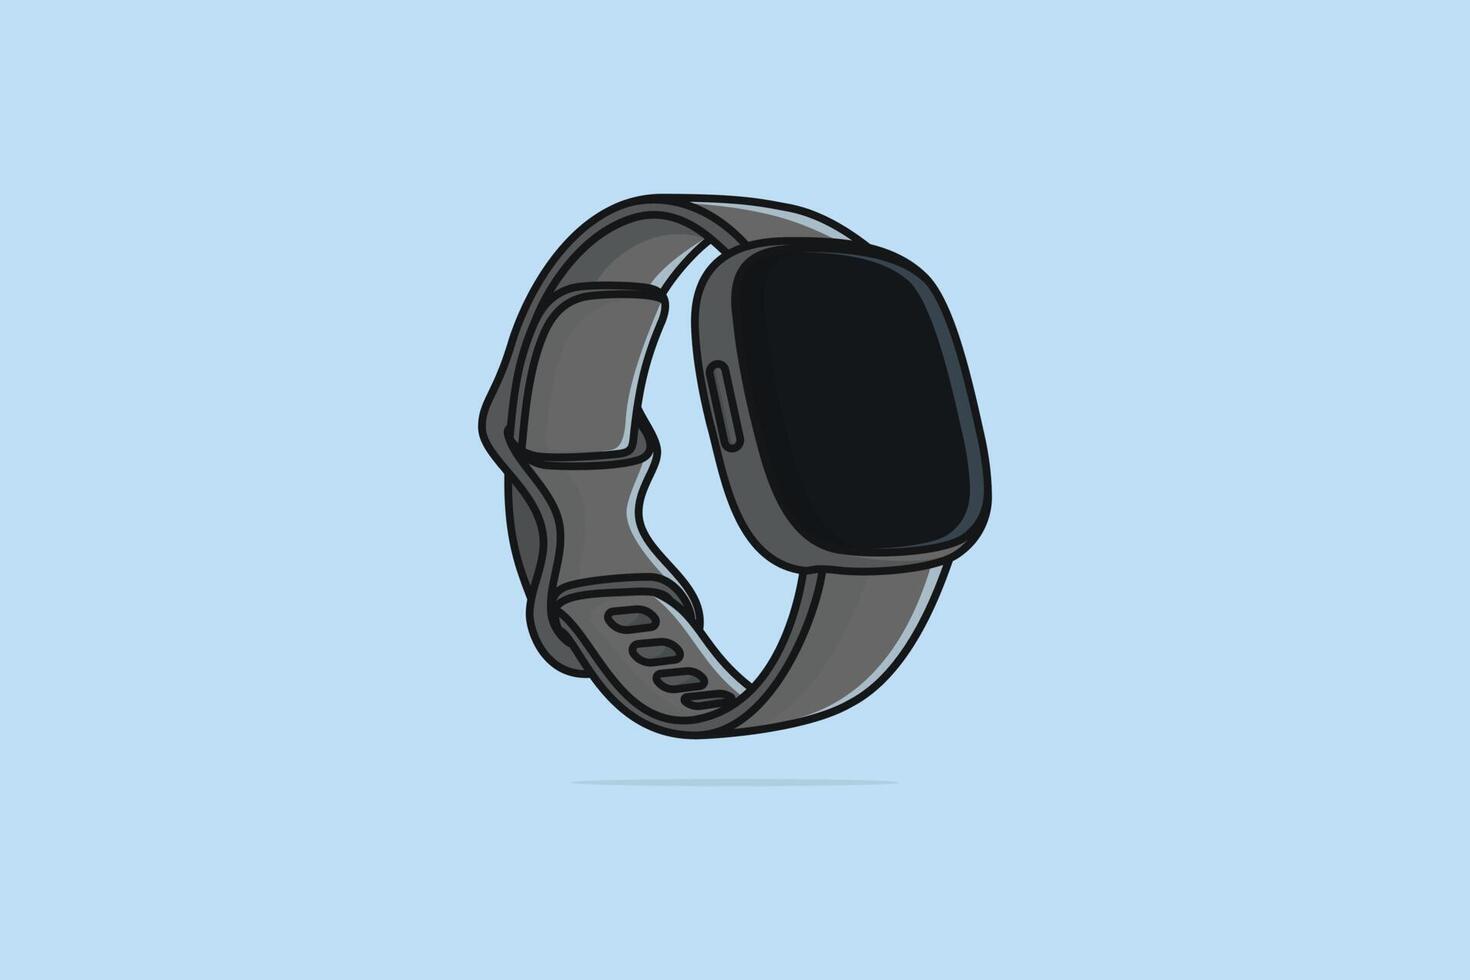 Smart Watch with Straps and Blank Screen vector illustration. Technology object icon concept. Smart technology device symbol vector design with shadow on blue background.